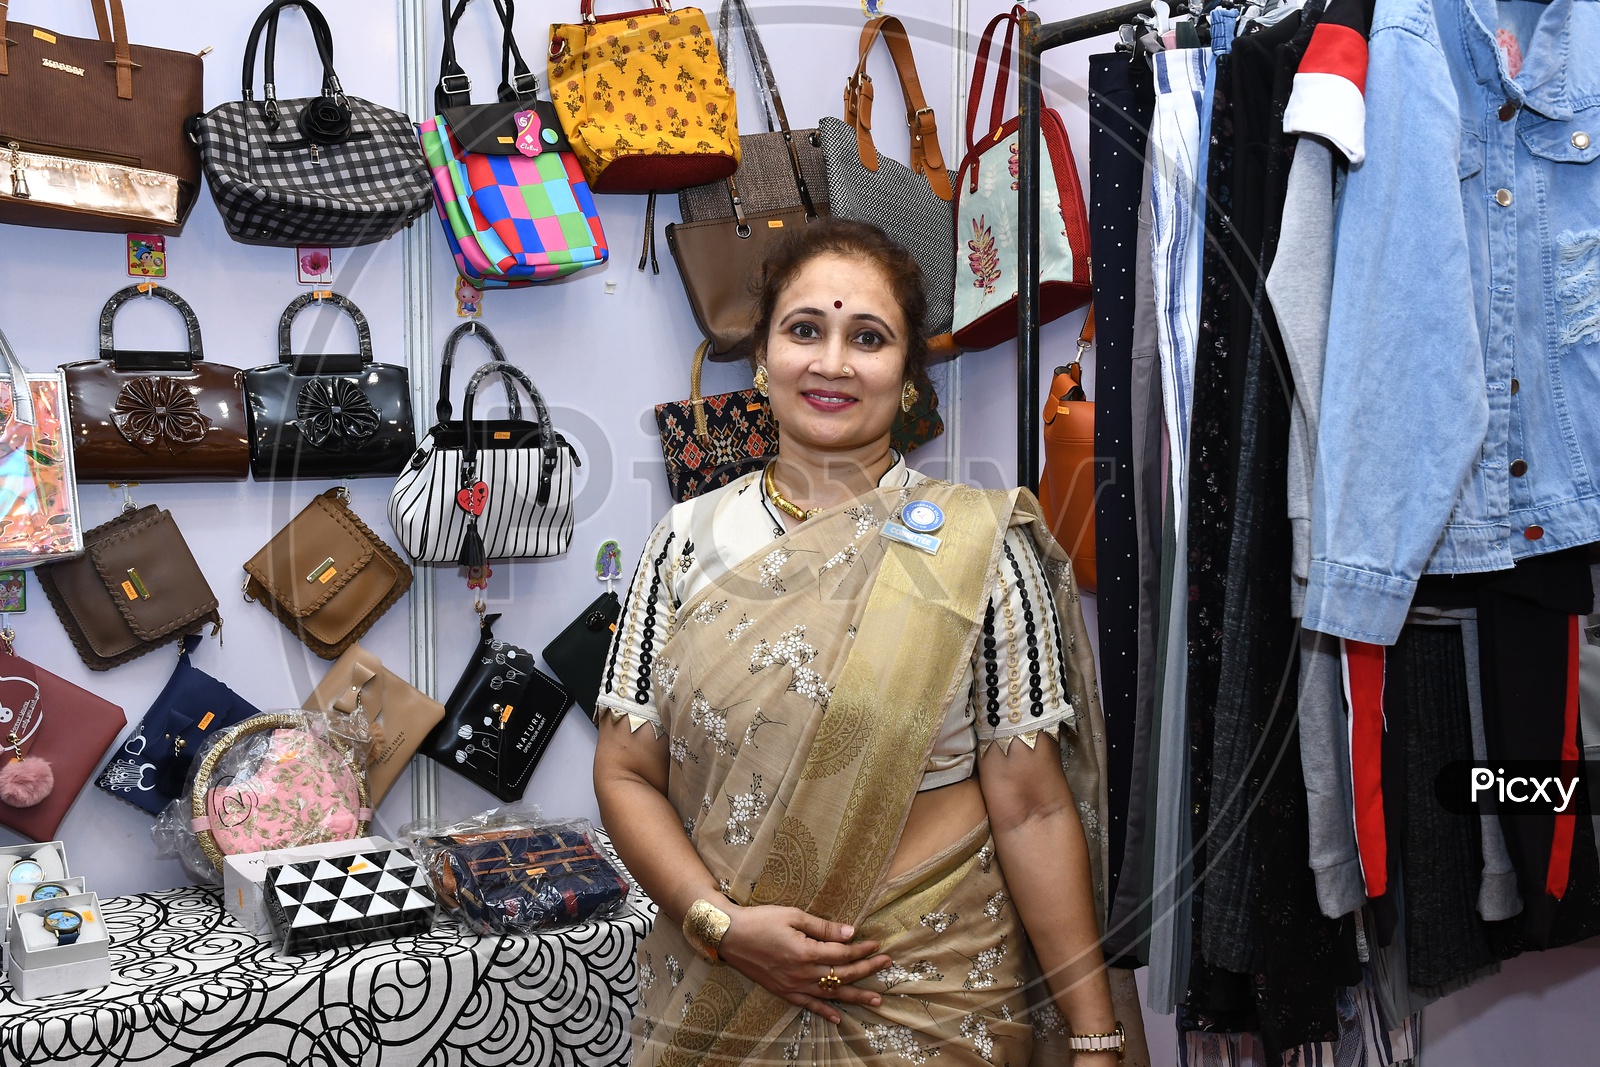 A Woman by the Handbag stall in the Exhibition